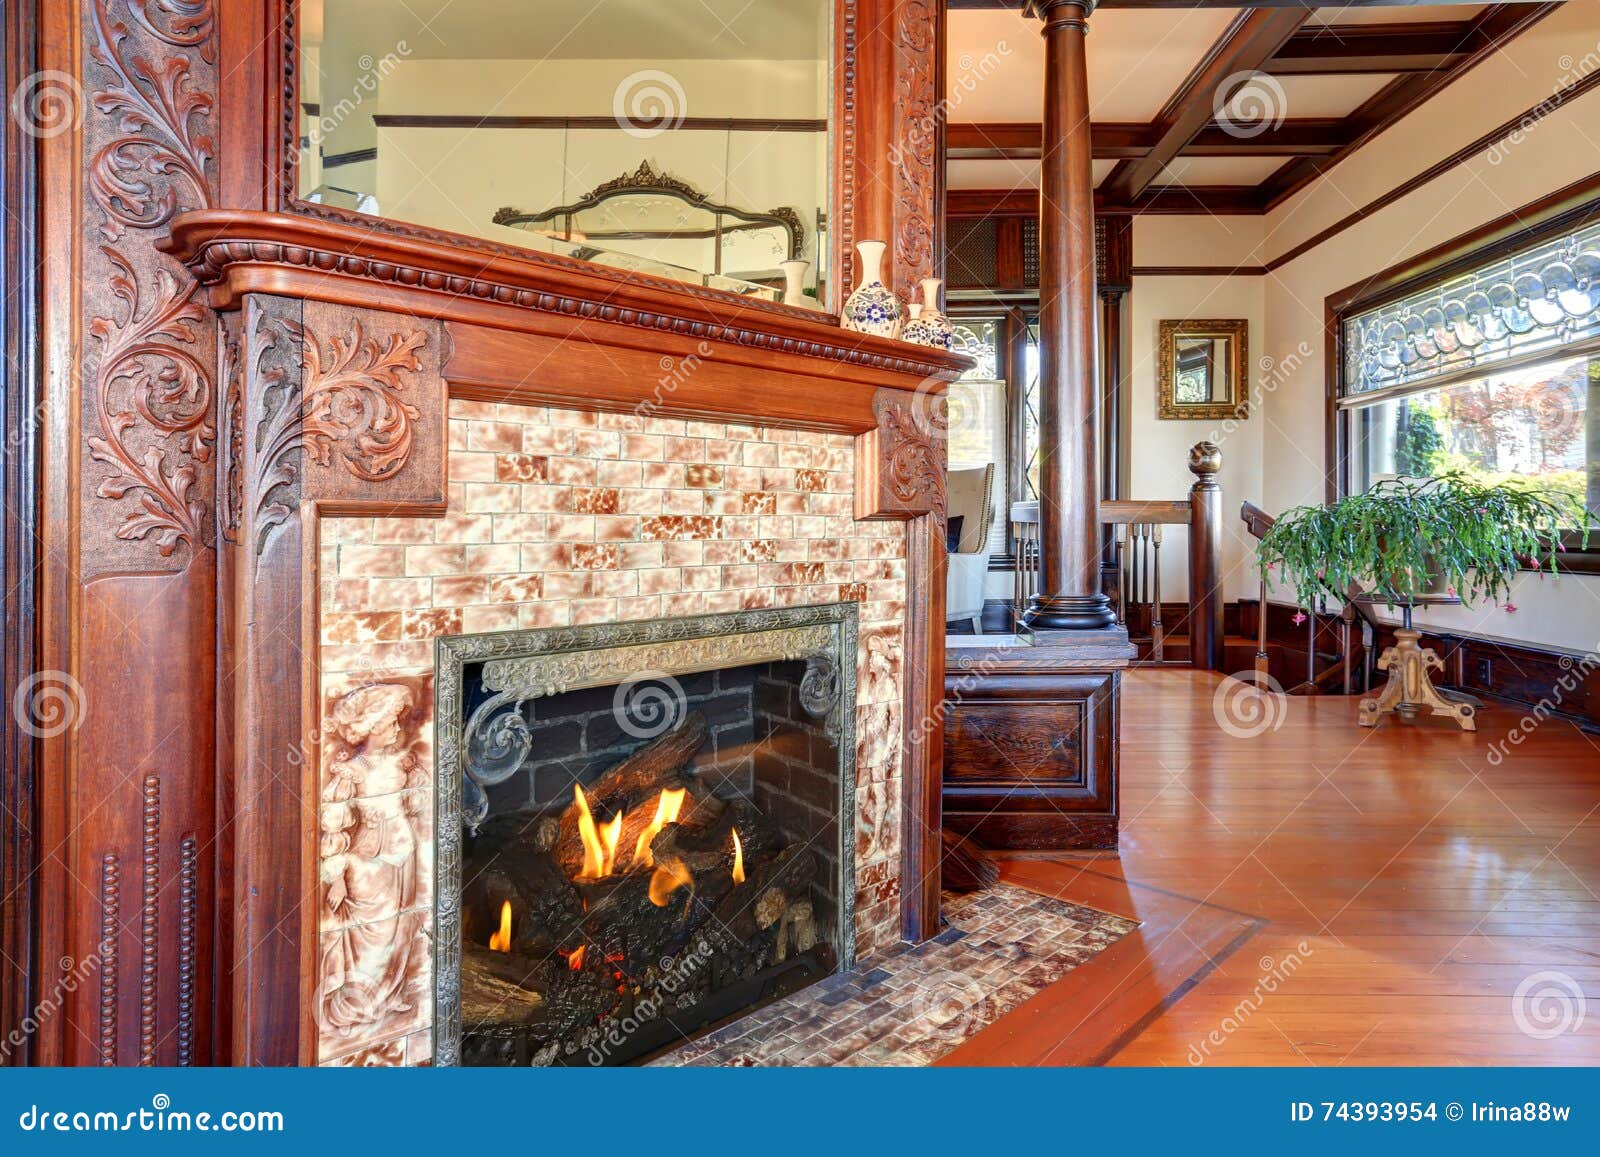 Clouse Up View Of Antique Fireplace With Decorative Tile Trim